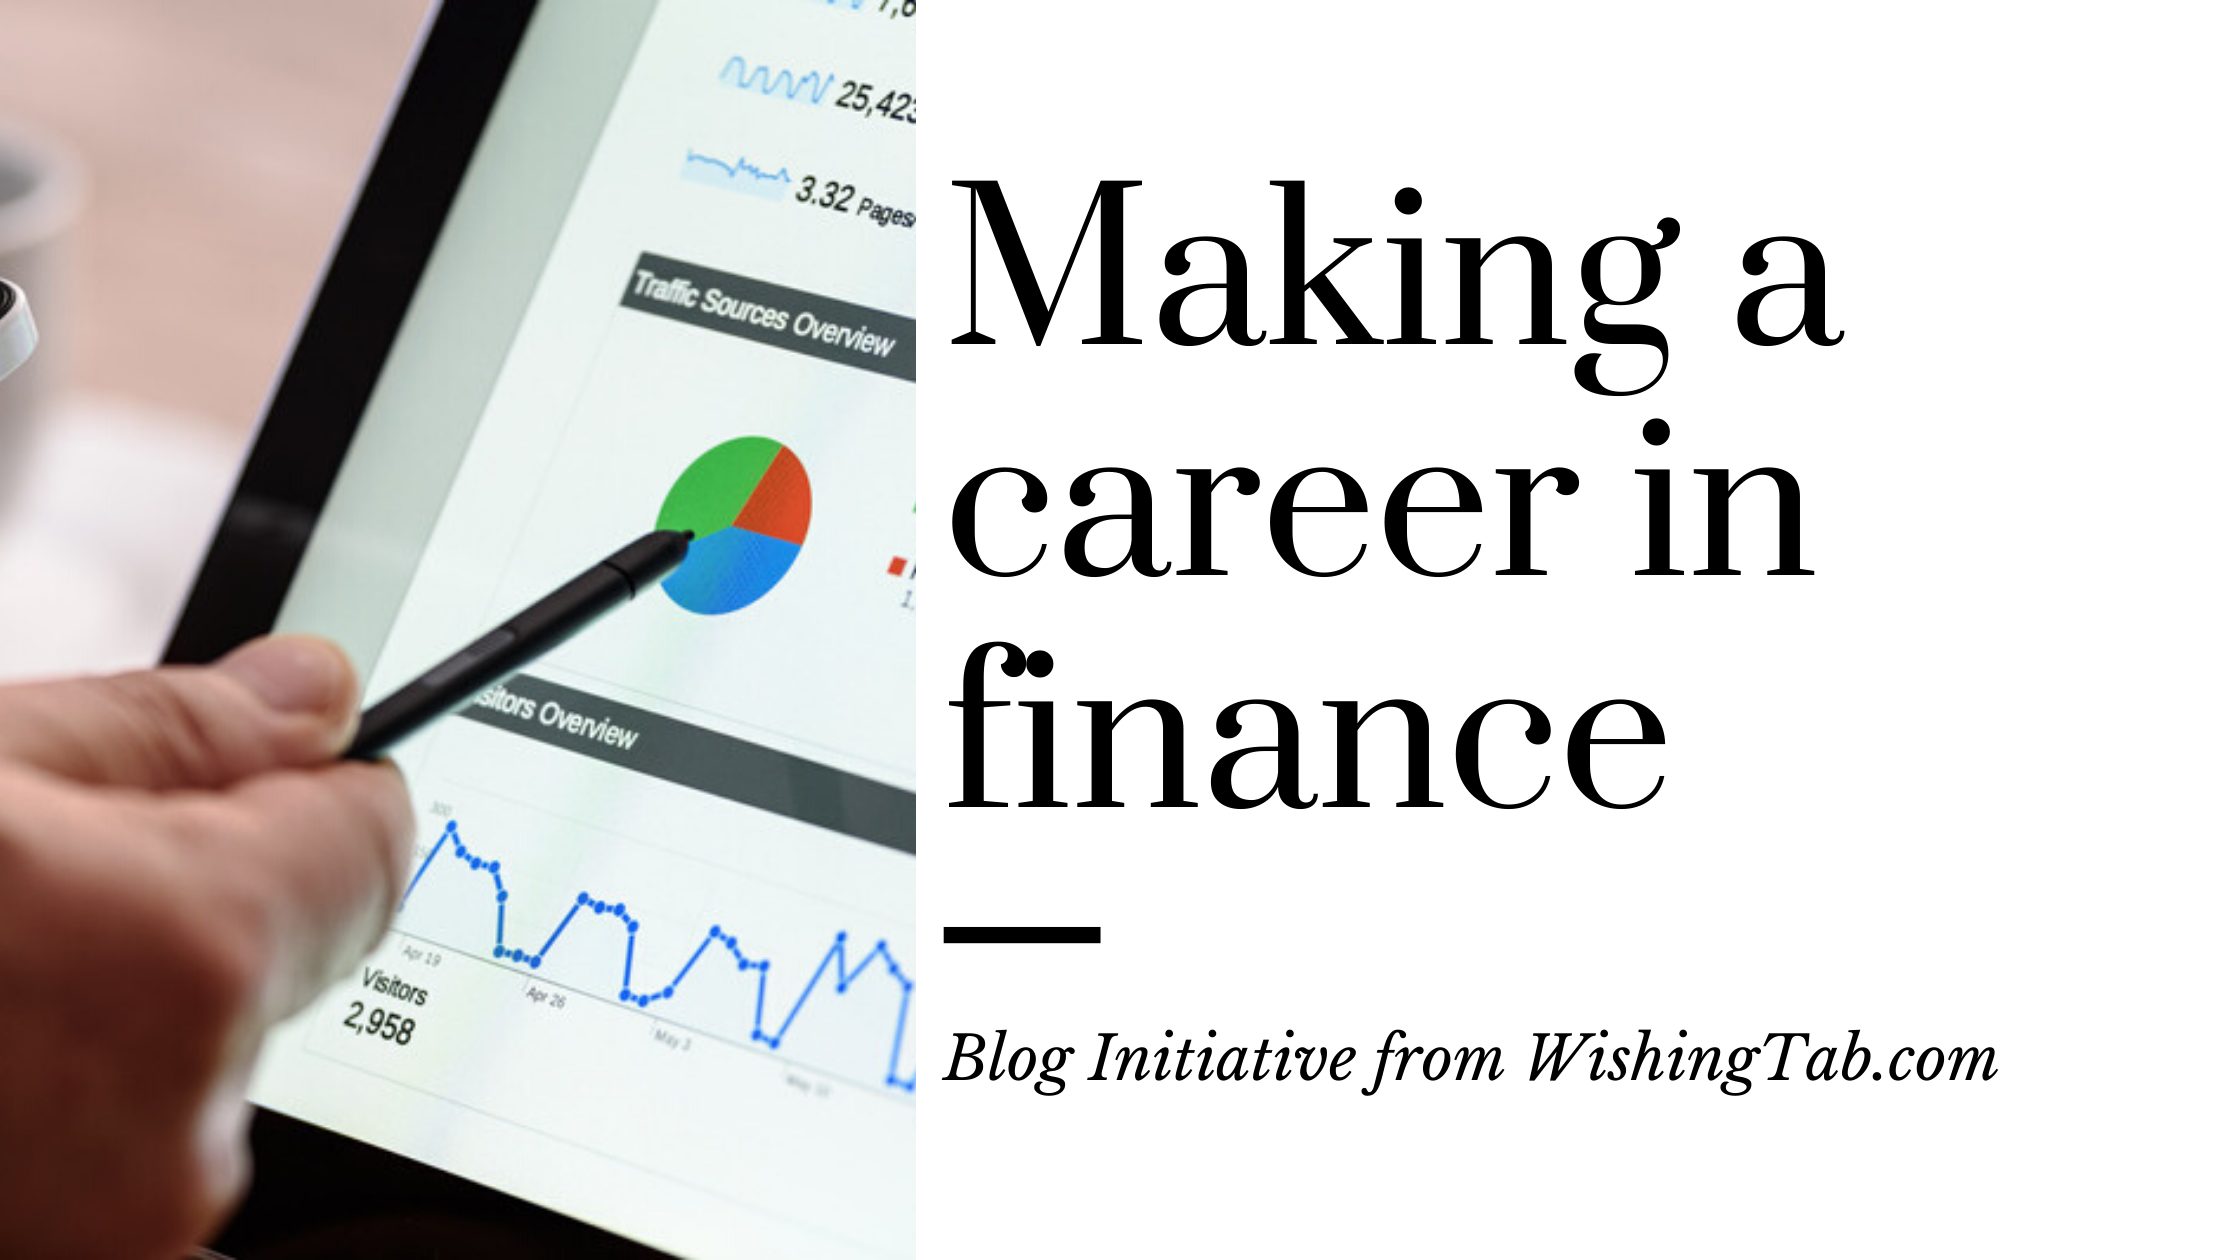 A complete guide for making a career in Finance